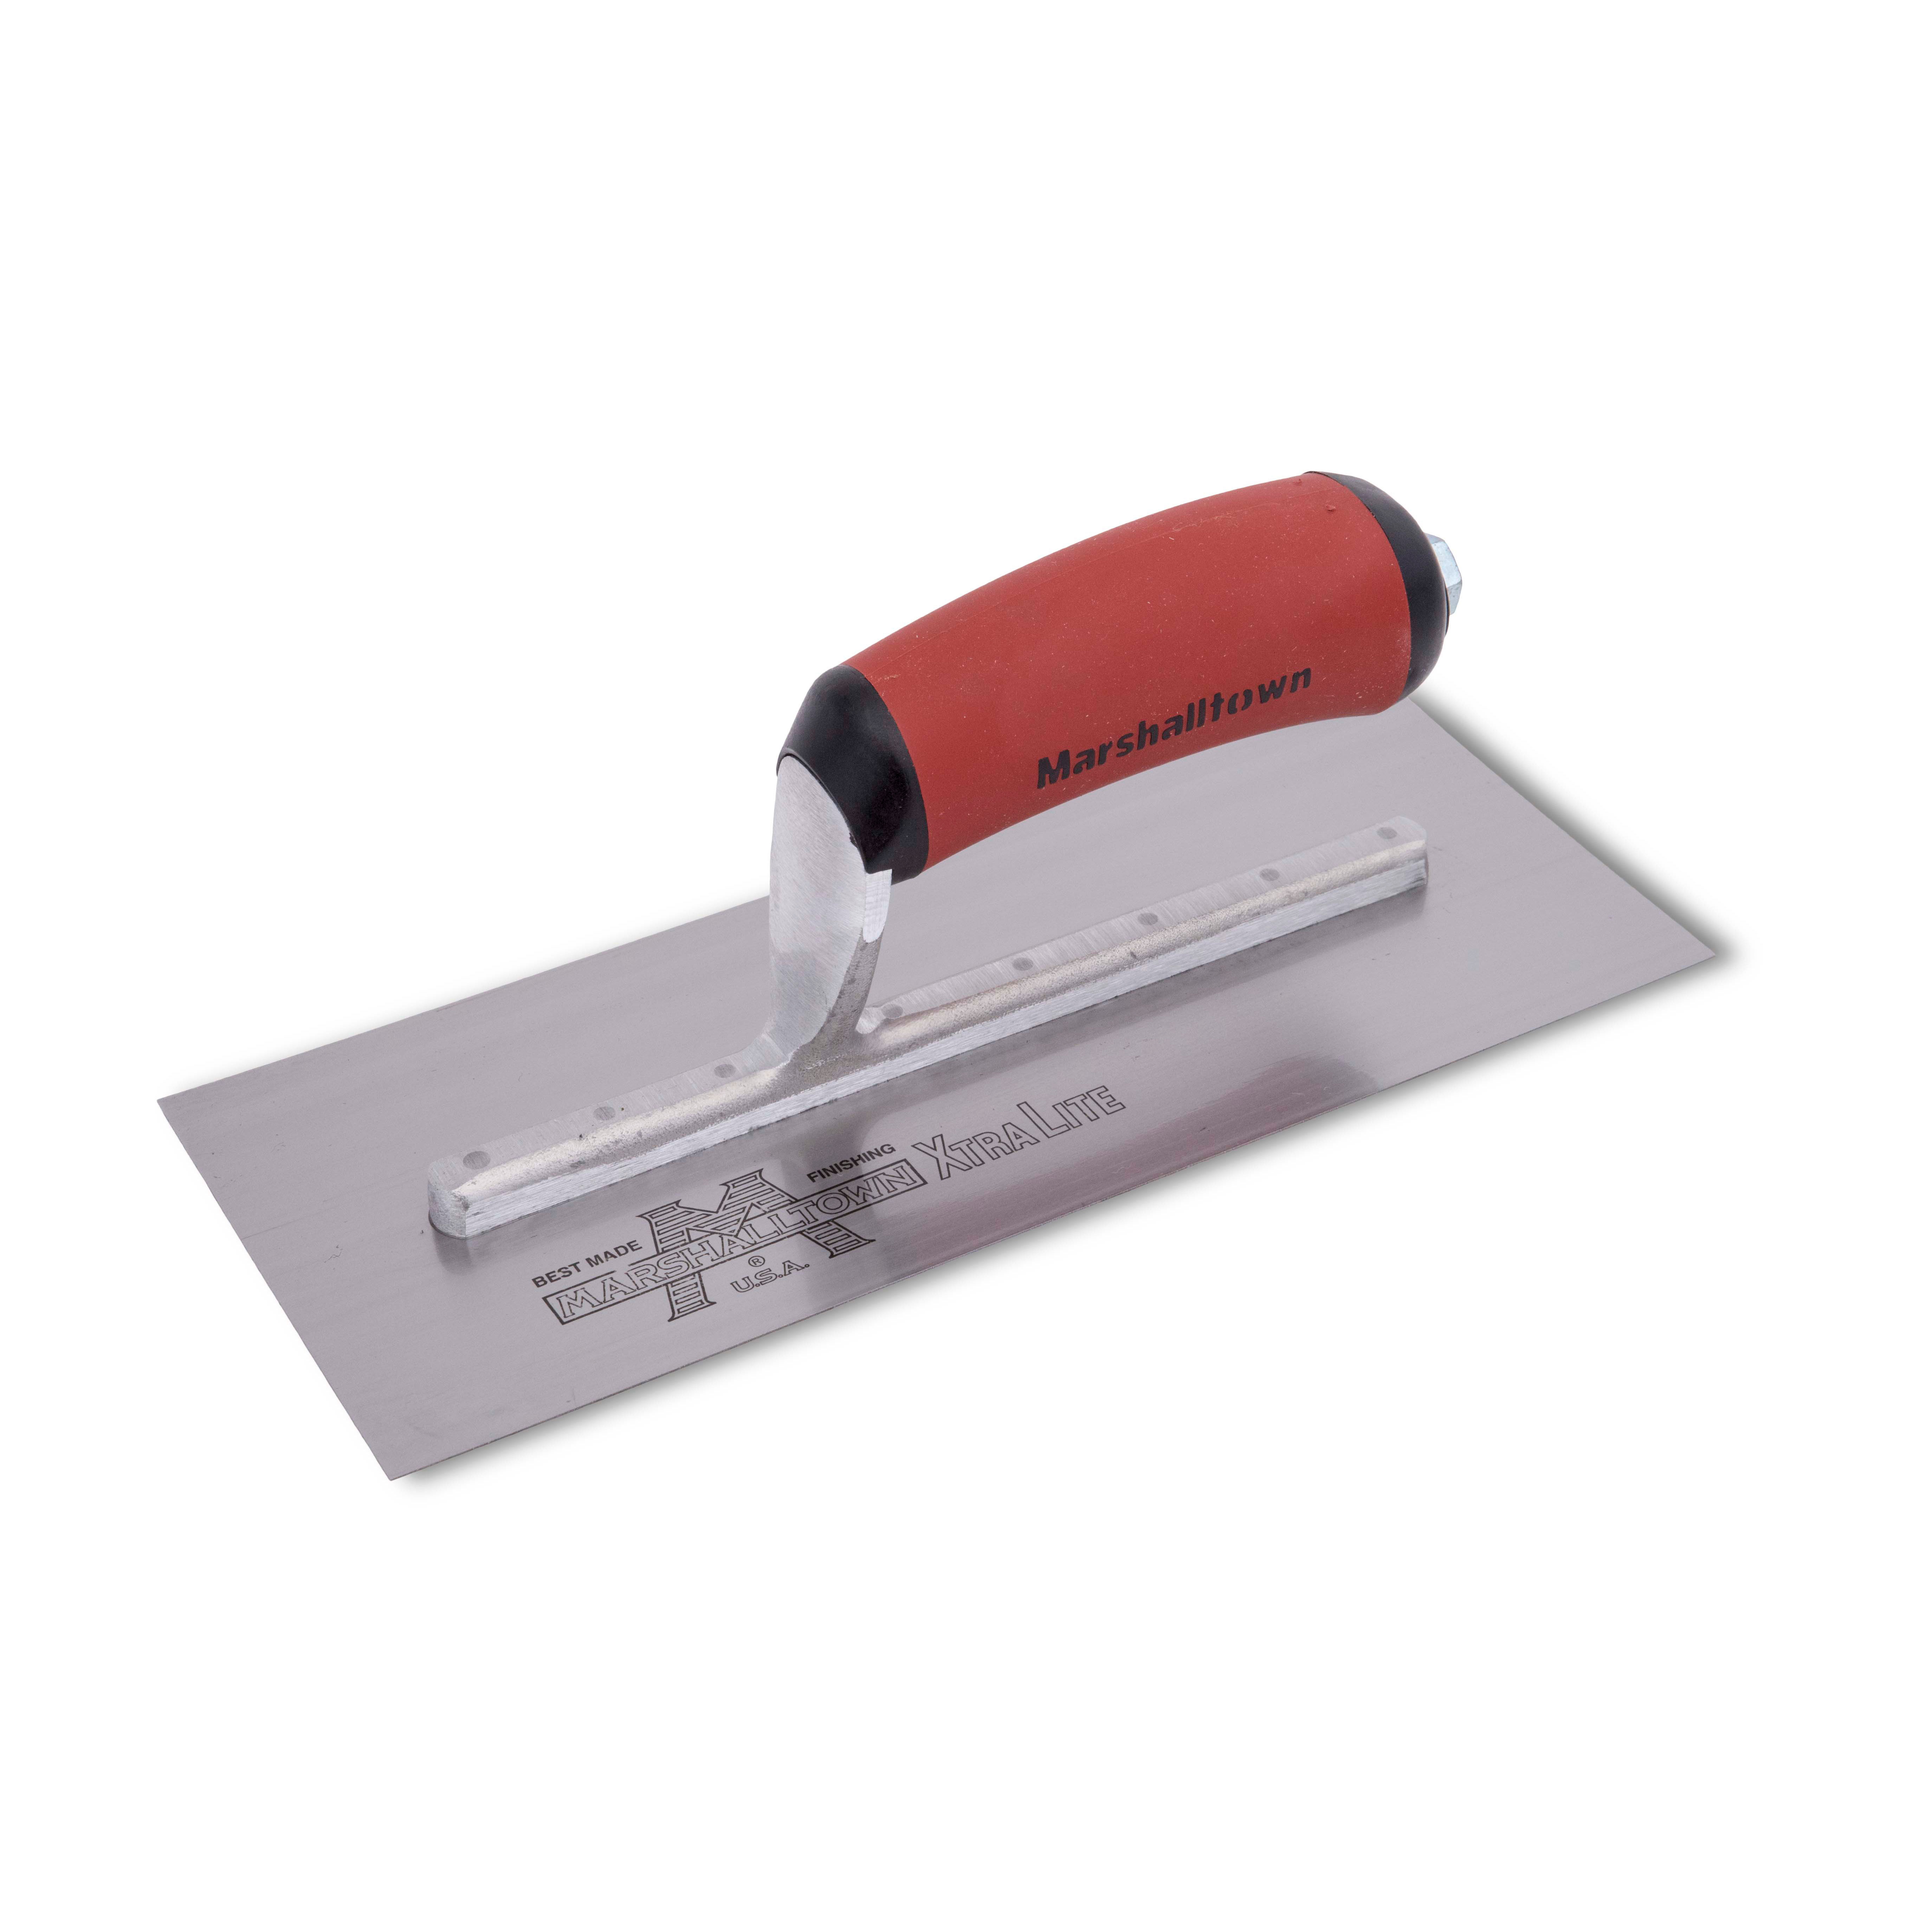 Marshalltown MXS55D 10in x 4in Finishing Trowel with Curved DuraSoft Handle MXS55D